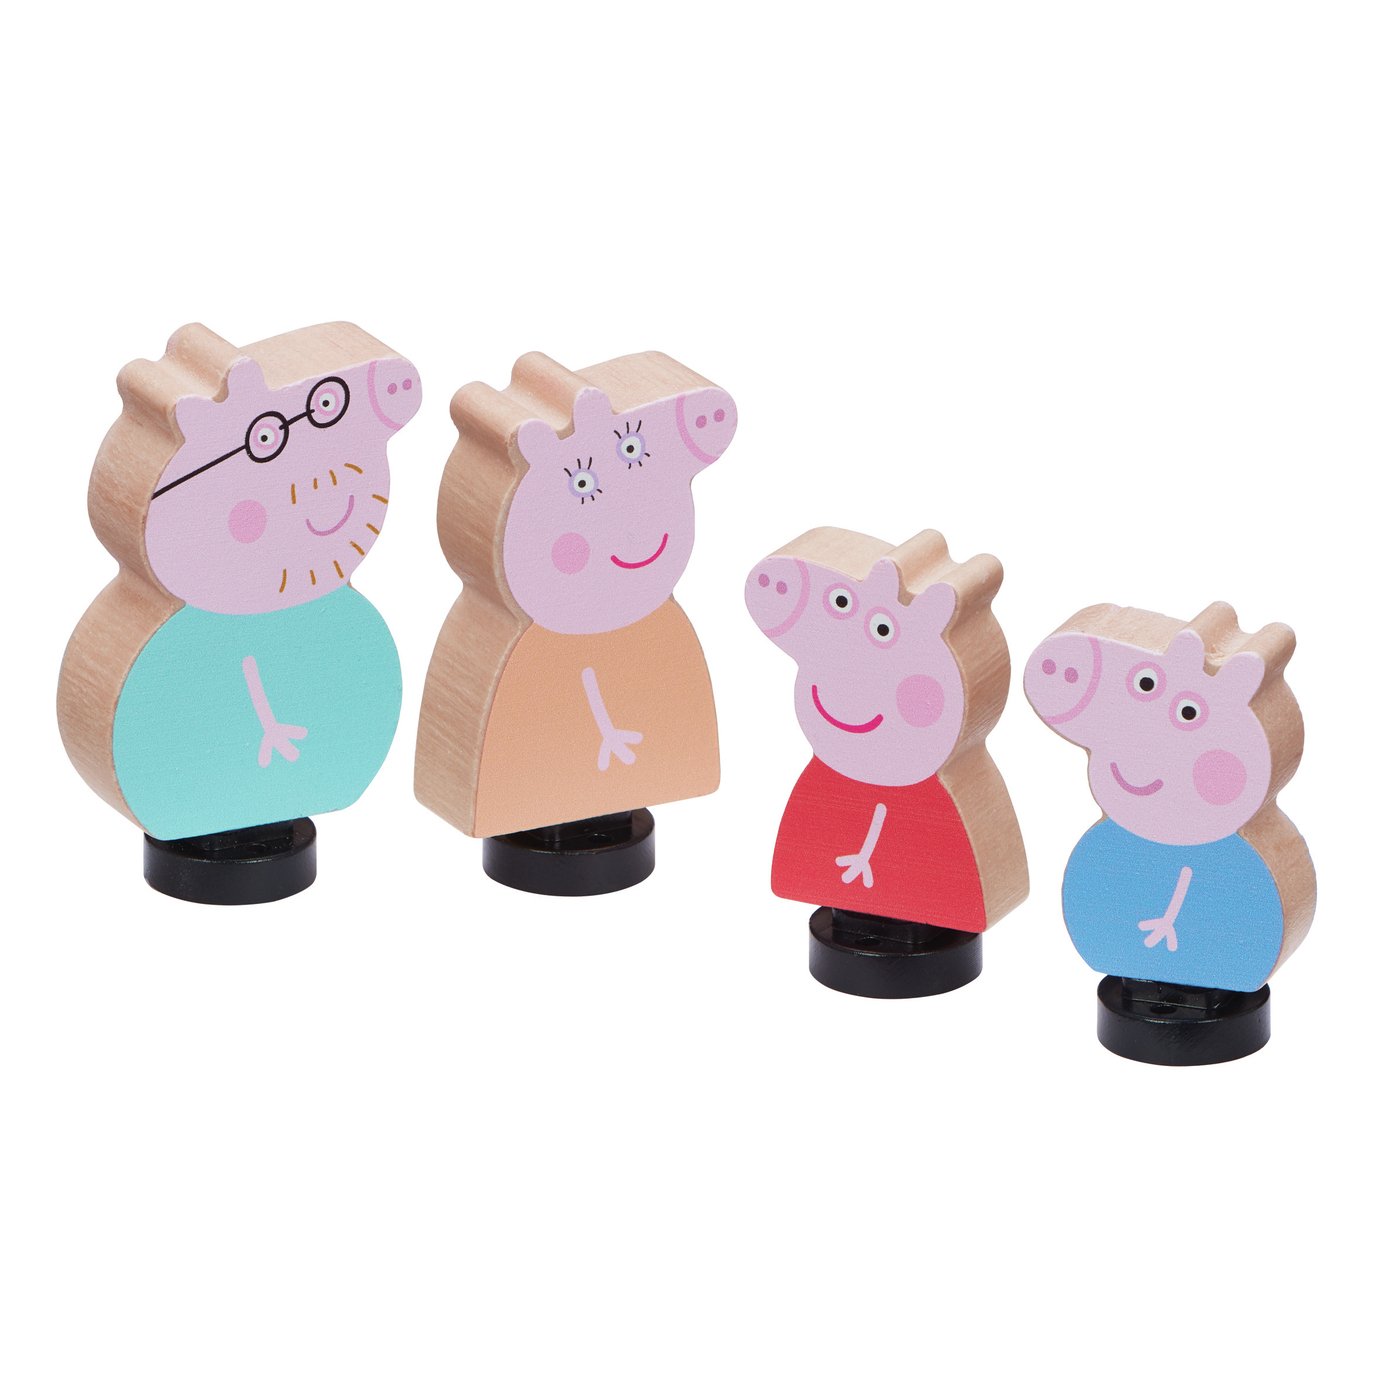 Peppa Pig Peppa's Wood Play Family Figure Pack Review